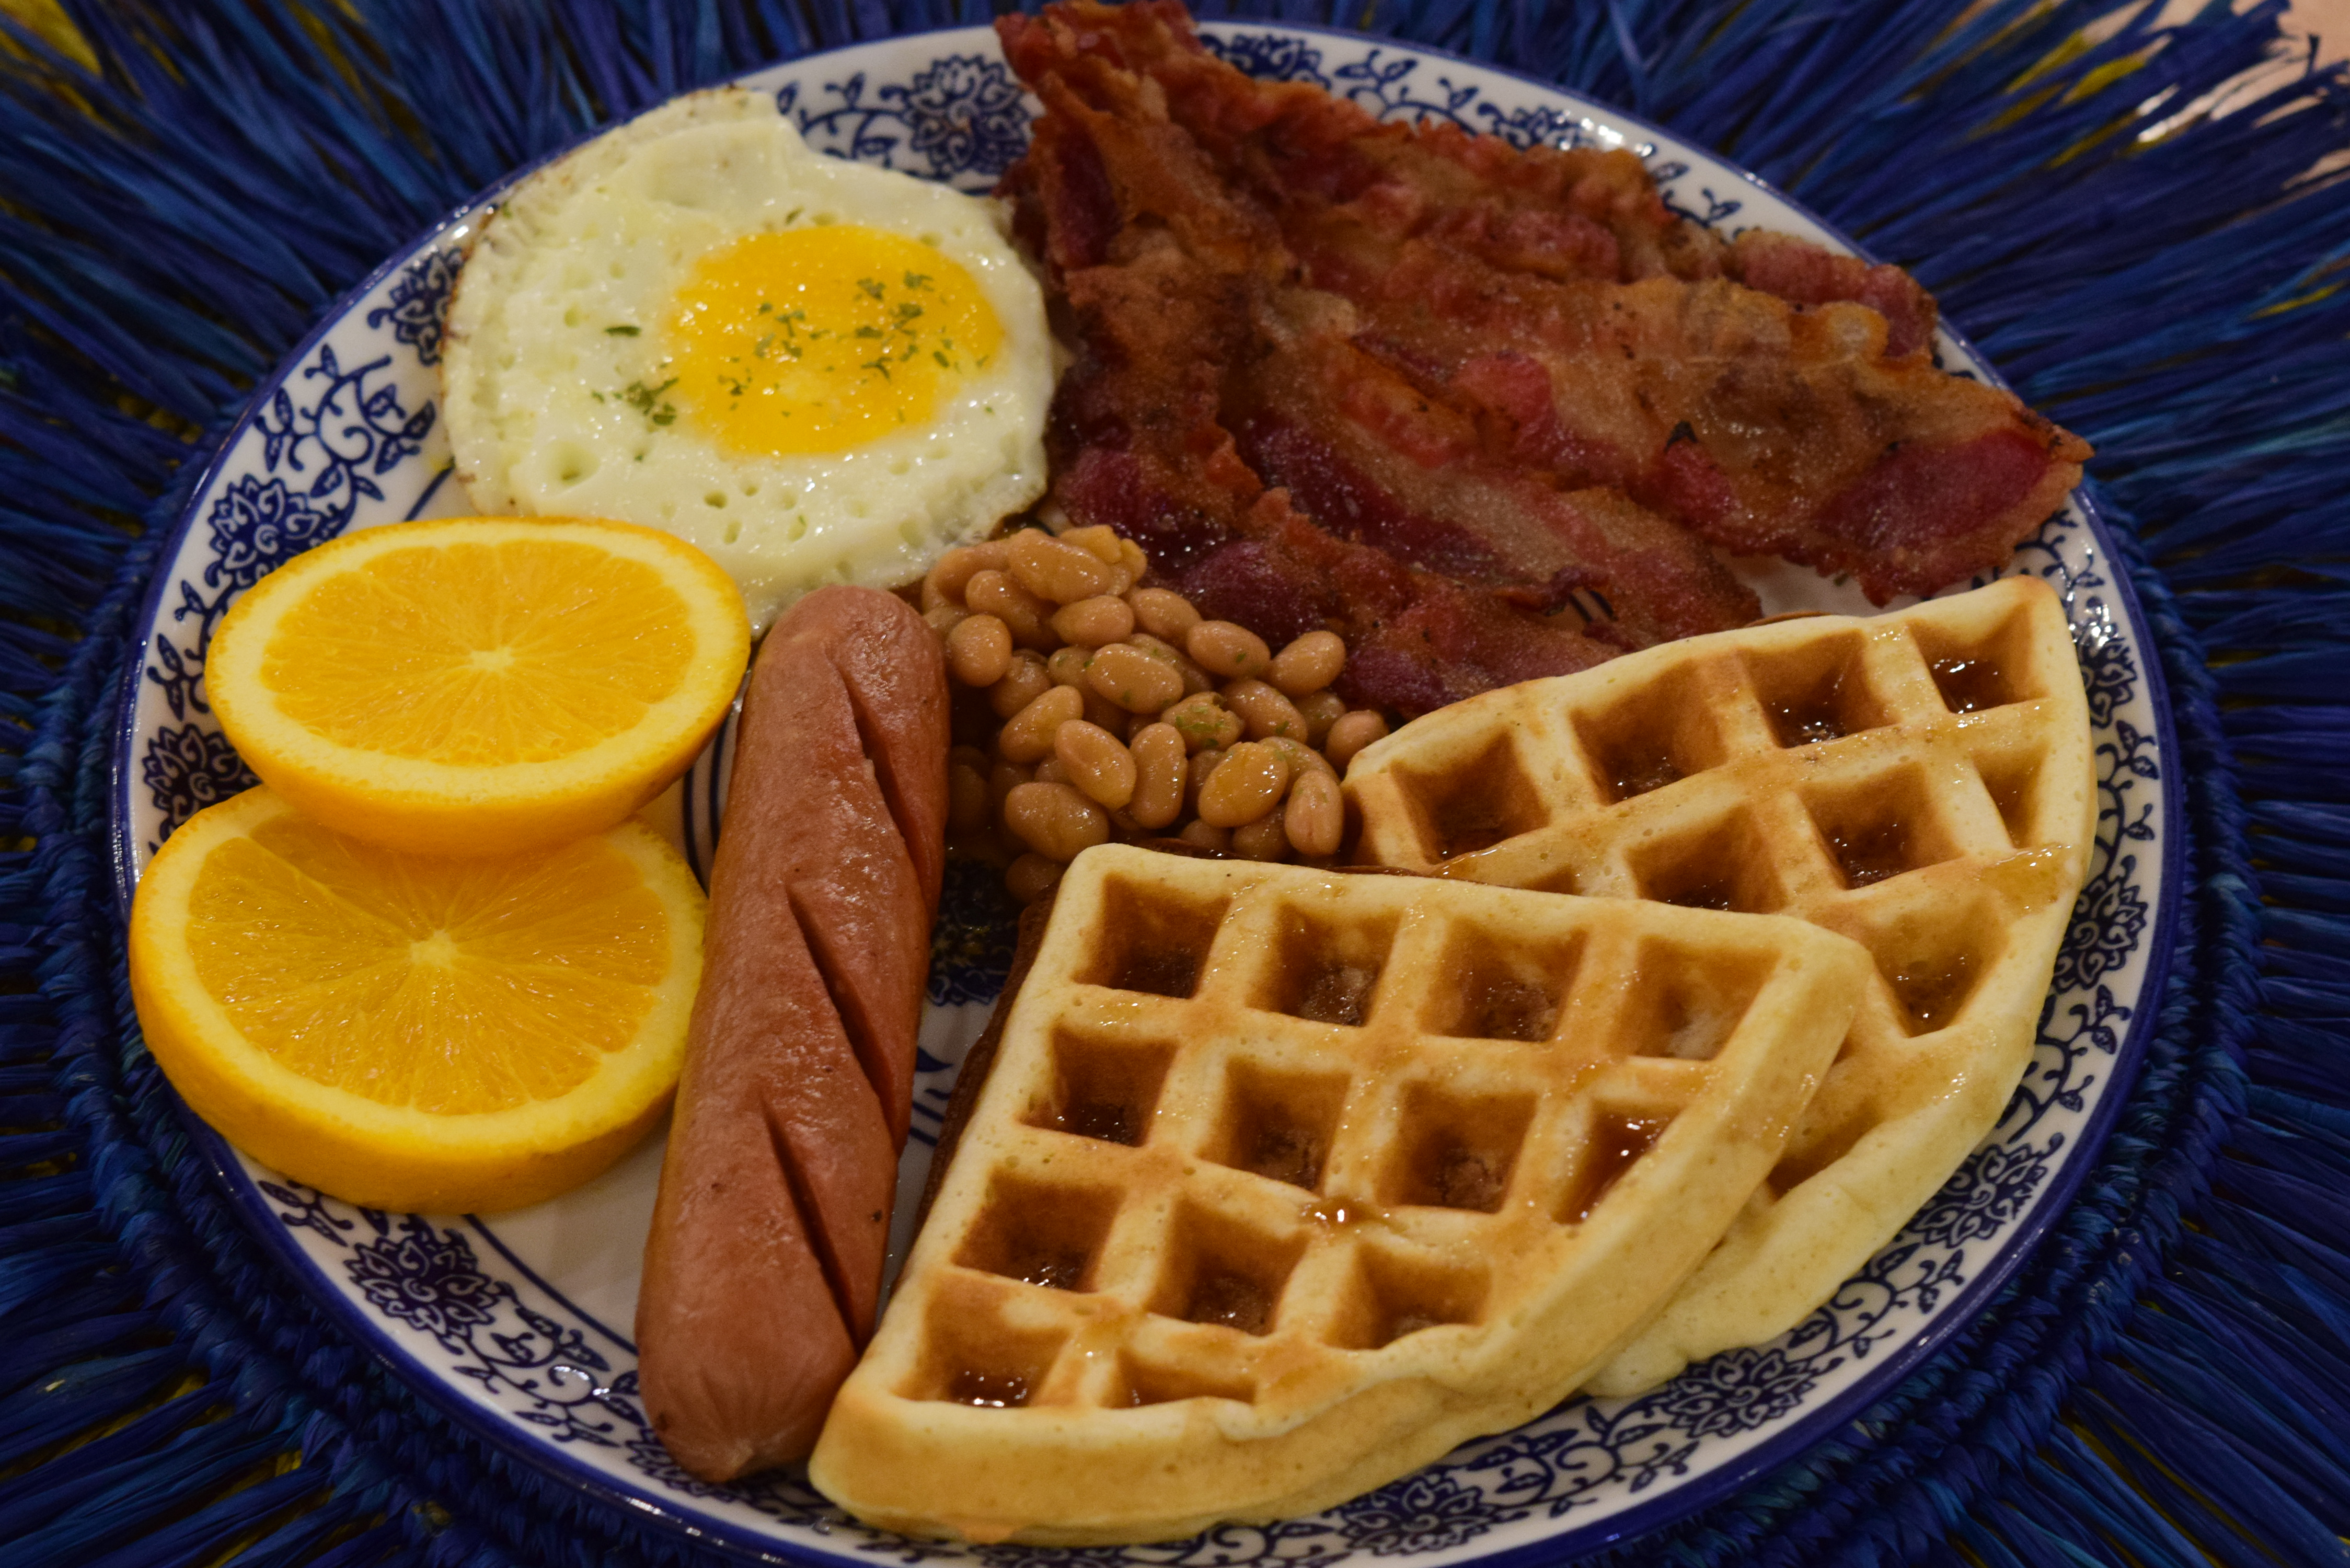 Aside from their healthy menu, they also offer all-day breakfast meals. Their Cooee breakfast meal includes waffles, bacon, sausage, egg and beans. 

Visit Cooee now and find out why it's becoming very popular among the young Cebuanos!